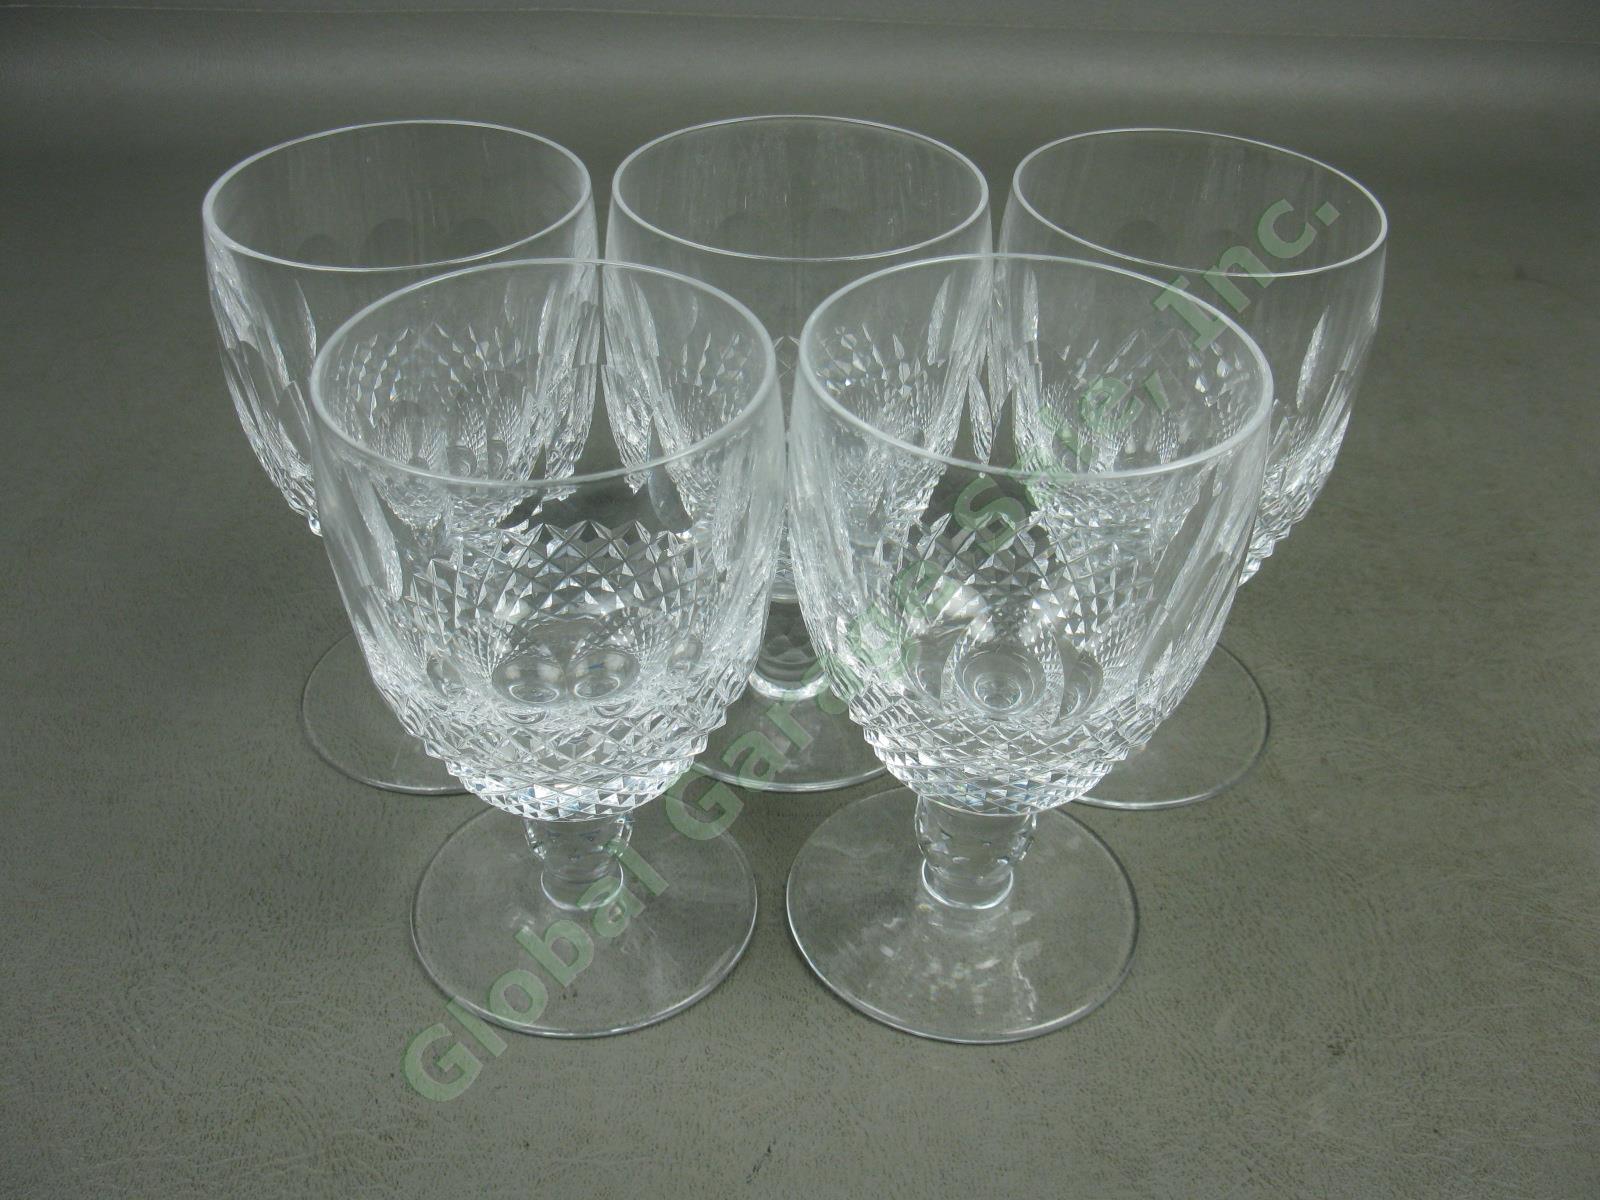 5 Waterford Cut Lead Crystal Colleen Water Goblet Glasses Set Lot 5-1/4" Tall NR